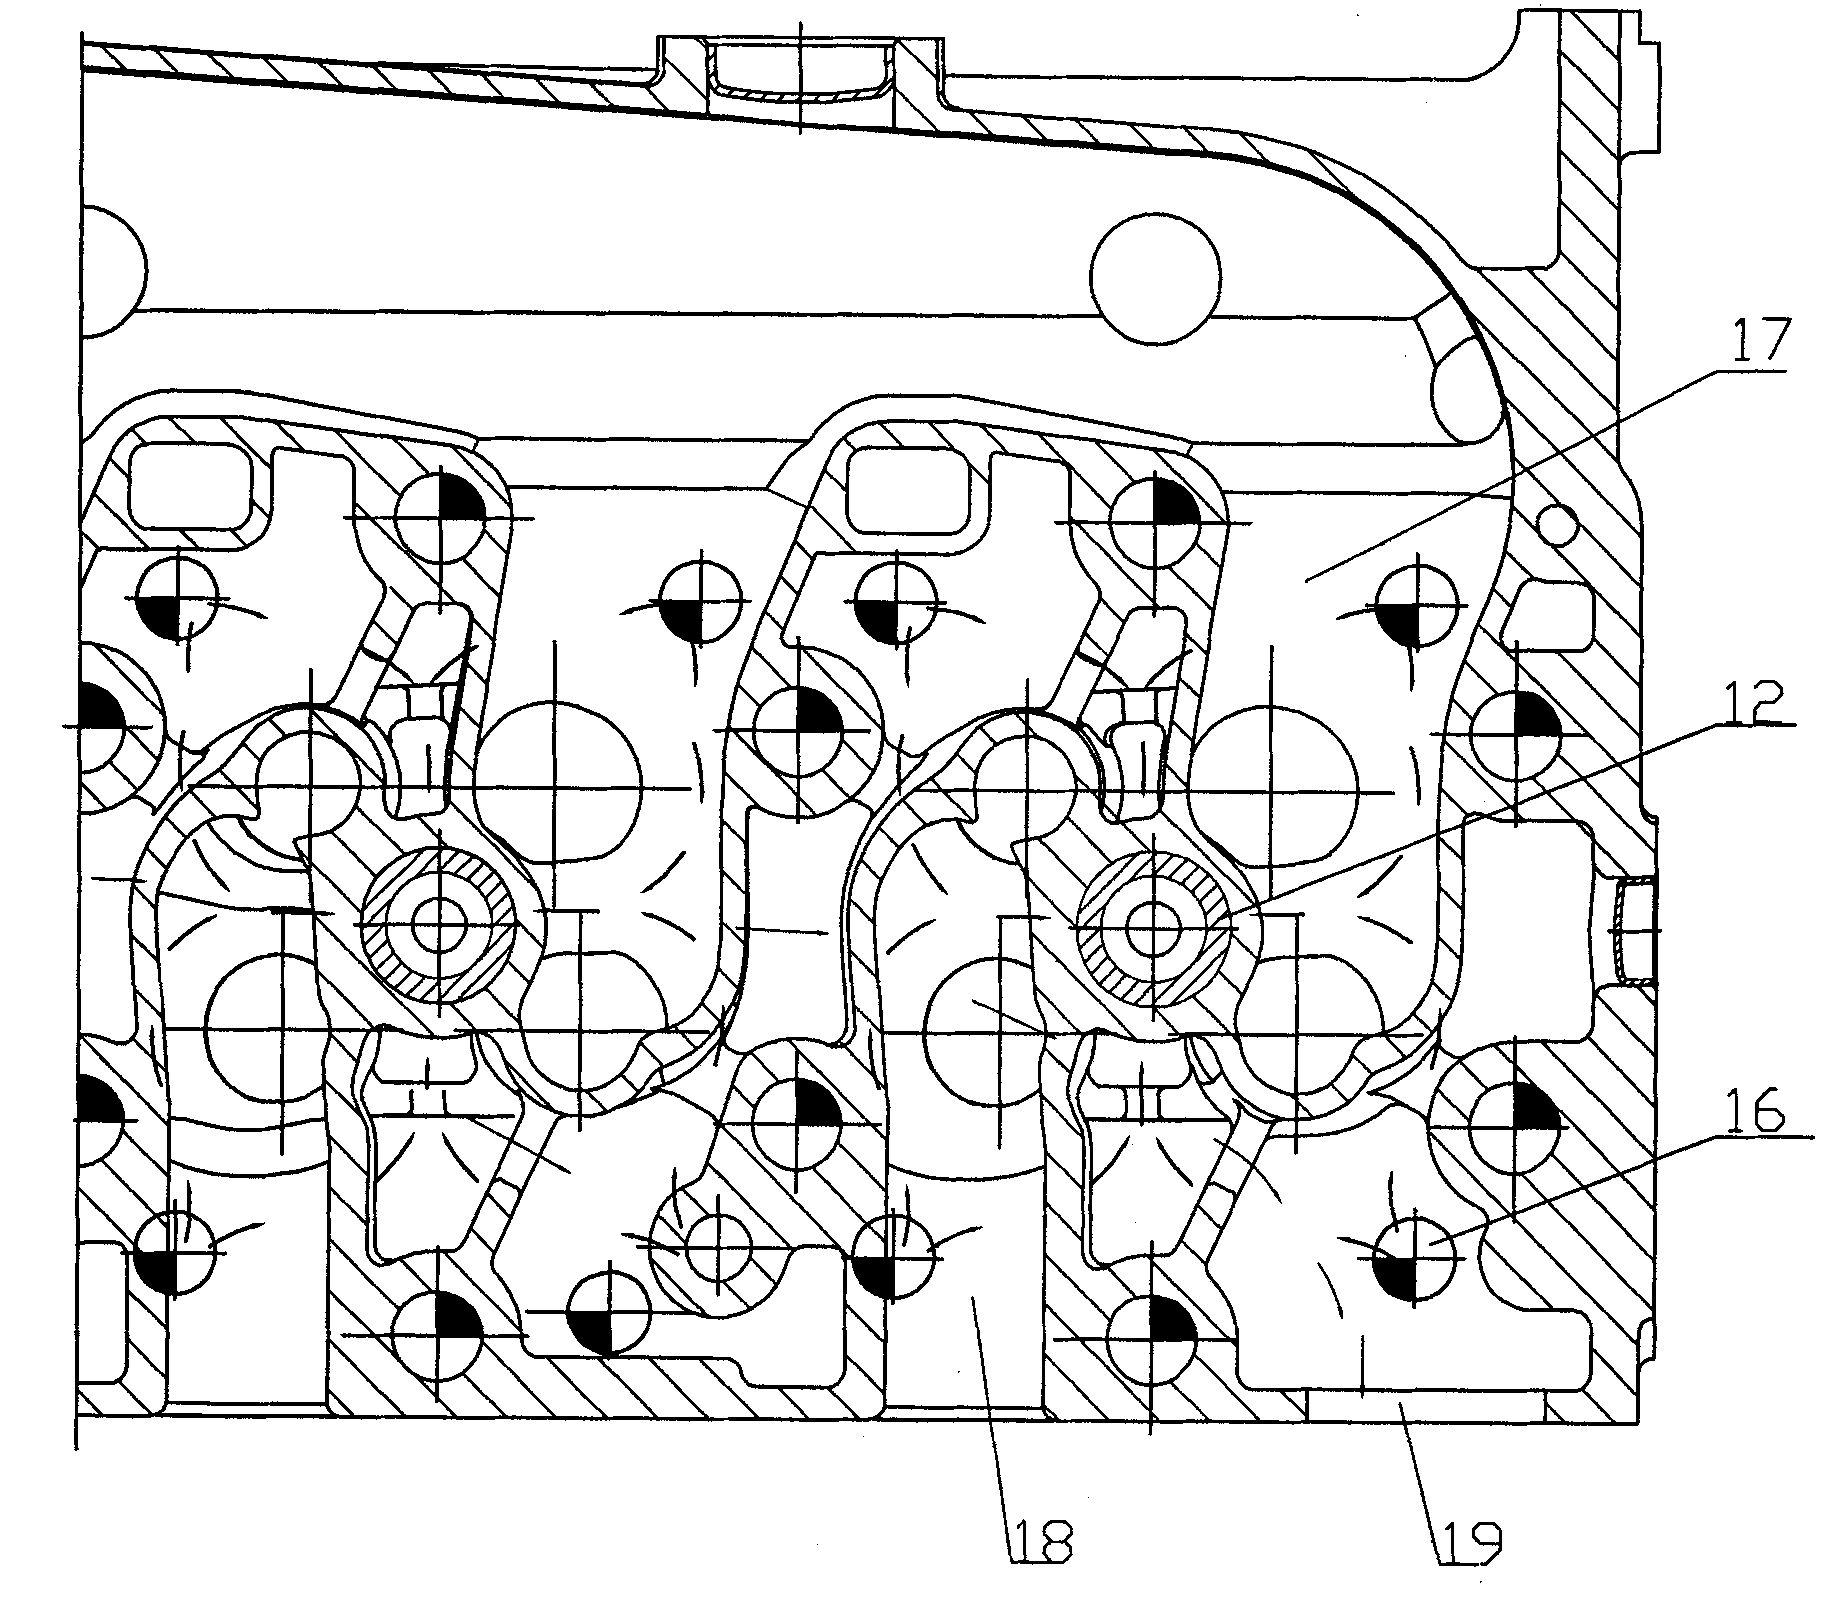 Water channel structure of cylinder cover